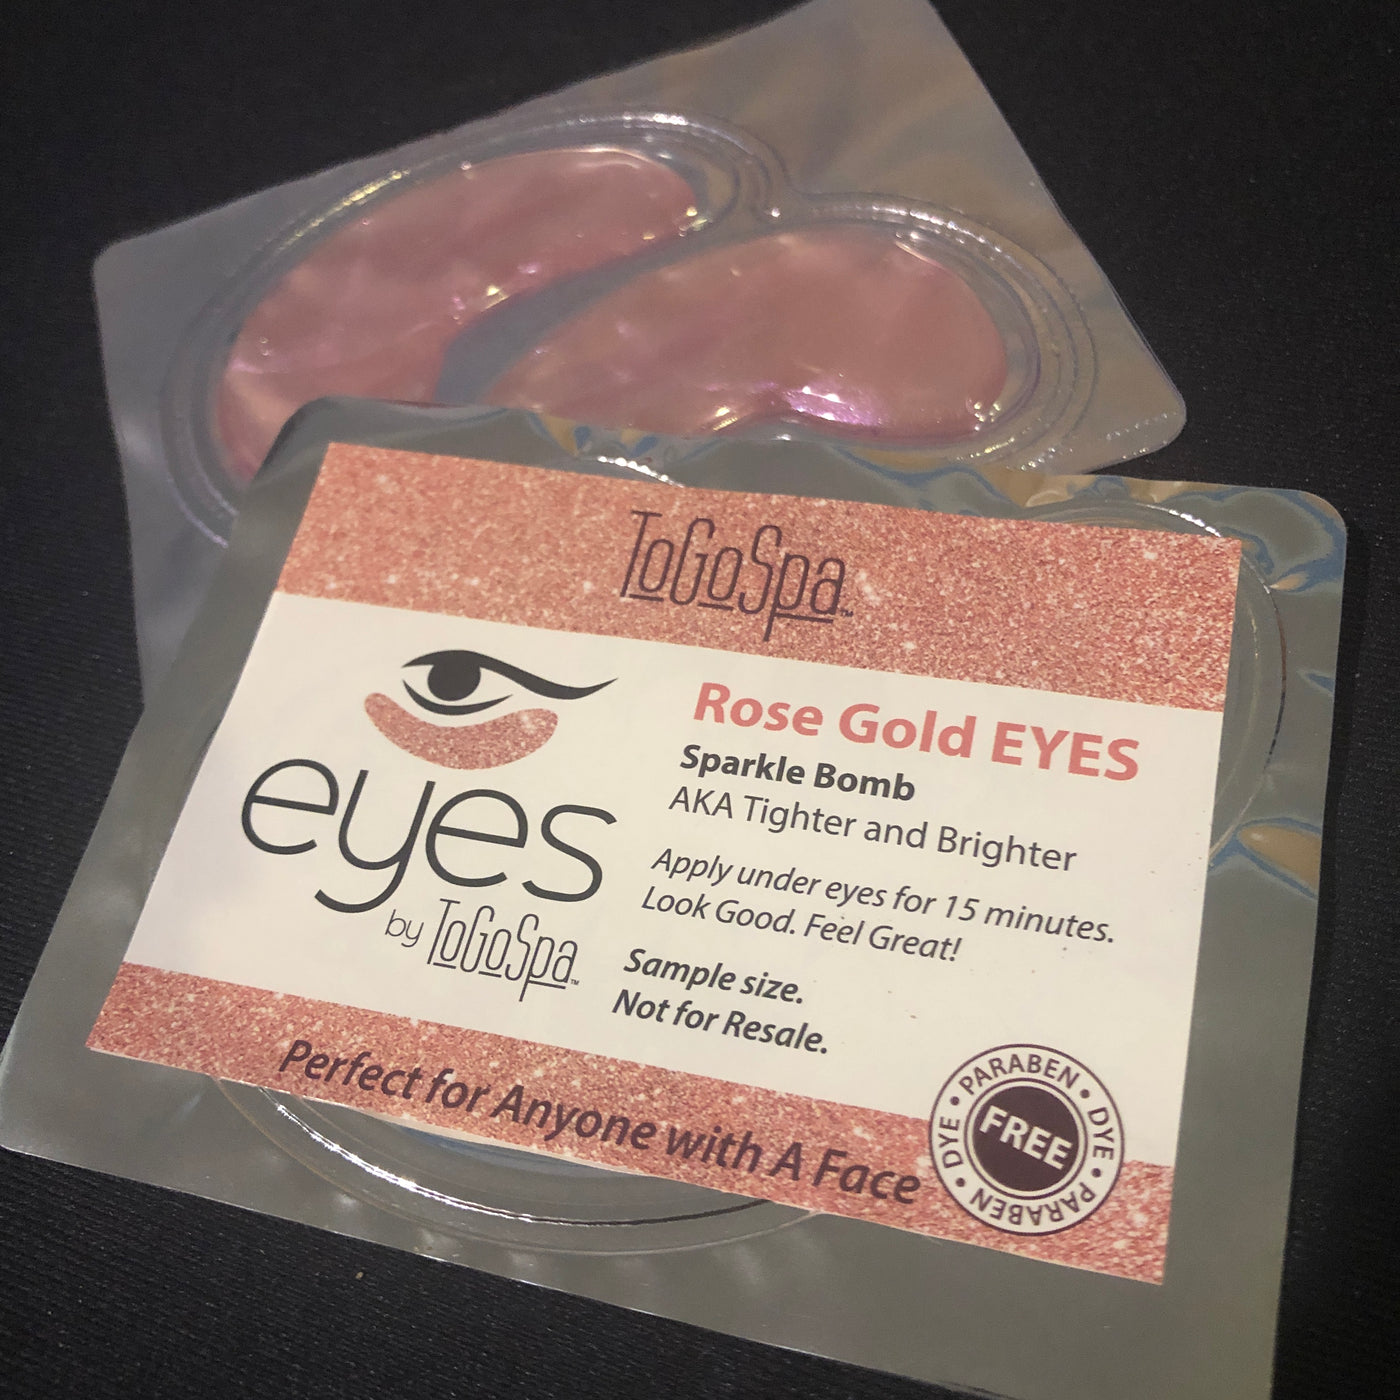 Wholesale Rose Gold Eyes Promotional Giveaway Singles (40 treatments)